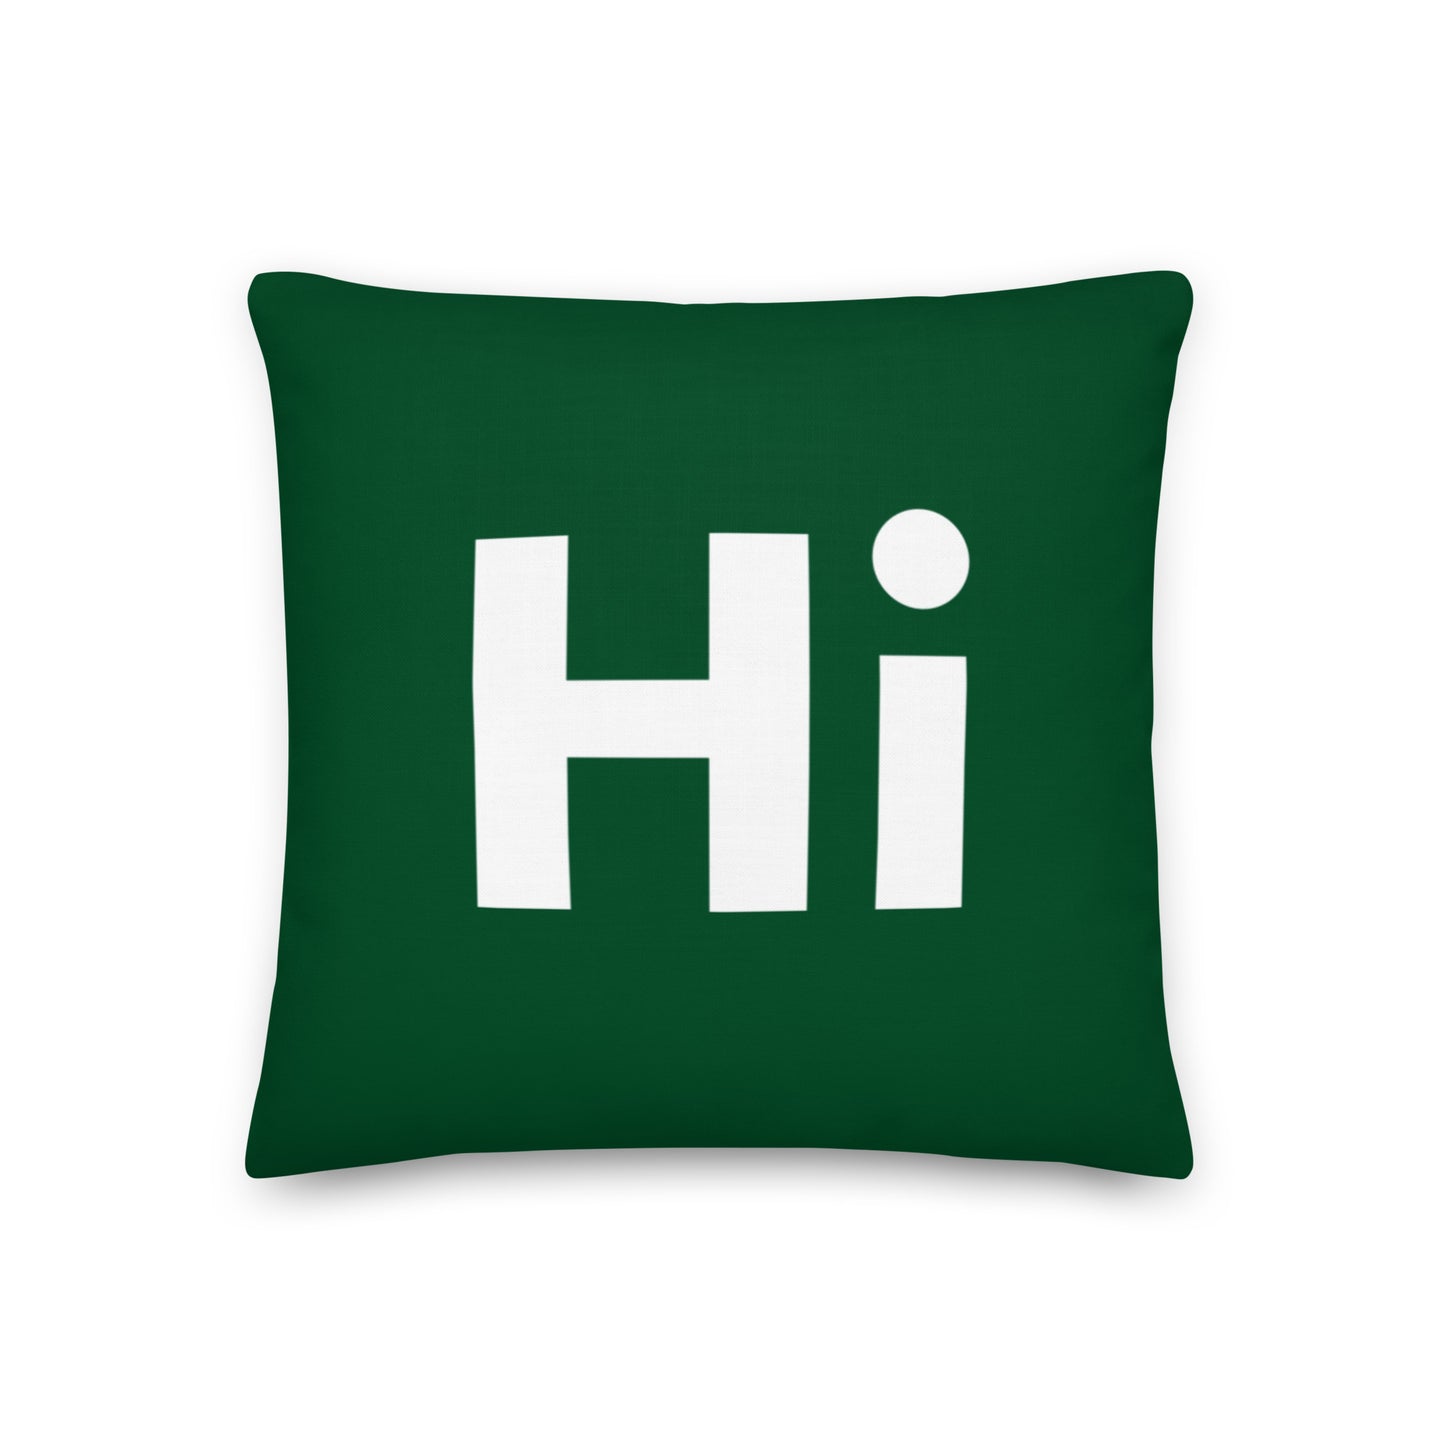 Hi Pillow in green by HiJohnny.com